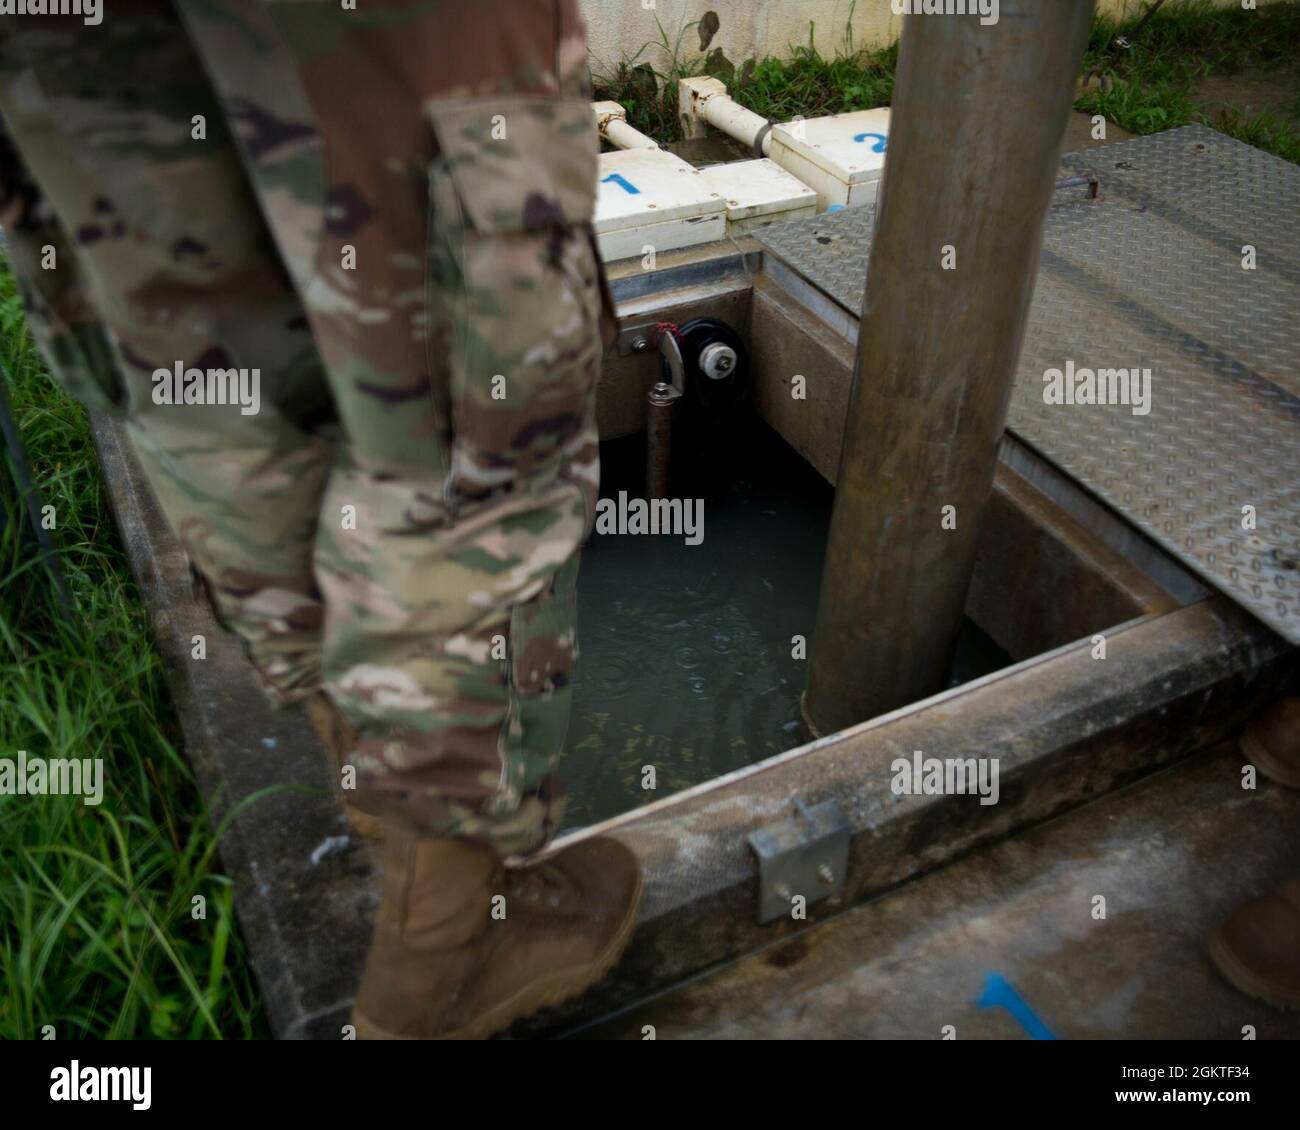 A U.S. Air Force 18th Civil Engineer Squadron Water and Fuel Systems Maintenance technician evacuates excess water from a sewage system overtaxed by heavy rainfall into a mobile system on Kadena Air Base, Japan, June 29, 2021. A WFSM technician’s duties range from treating water to ensure it's safe to drink, to maintaining the aircraft’s fueling systems that keep jets in the air. Stock Photo